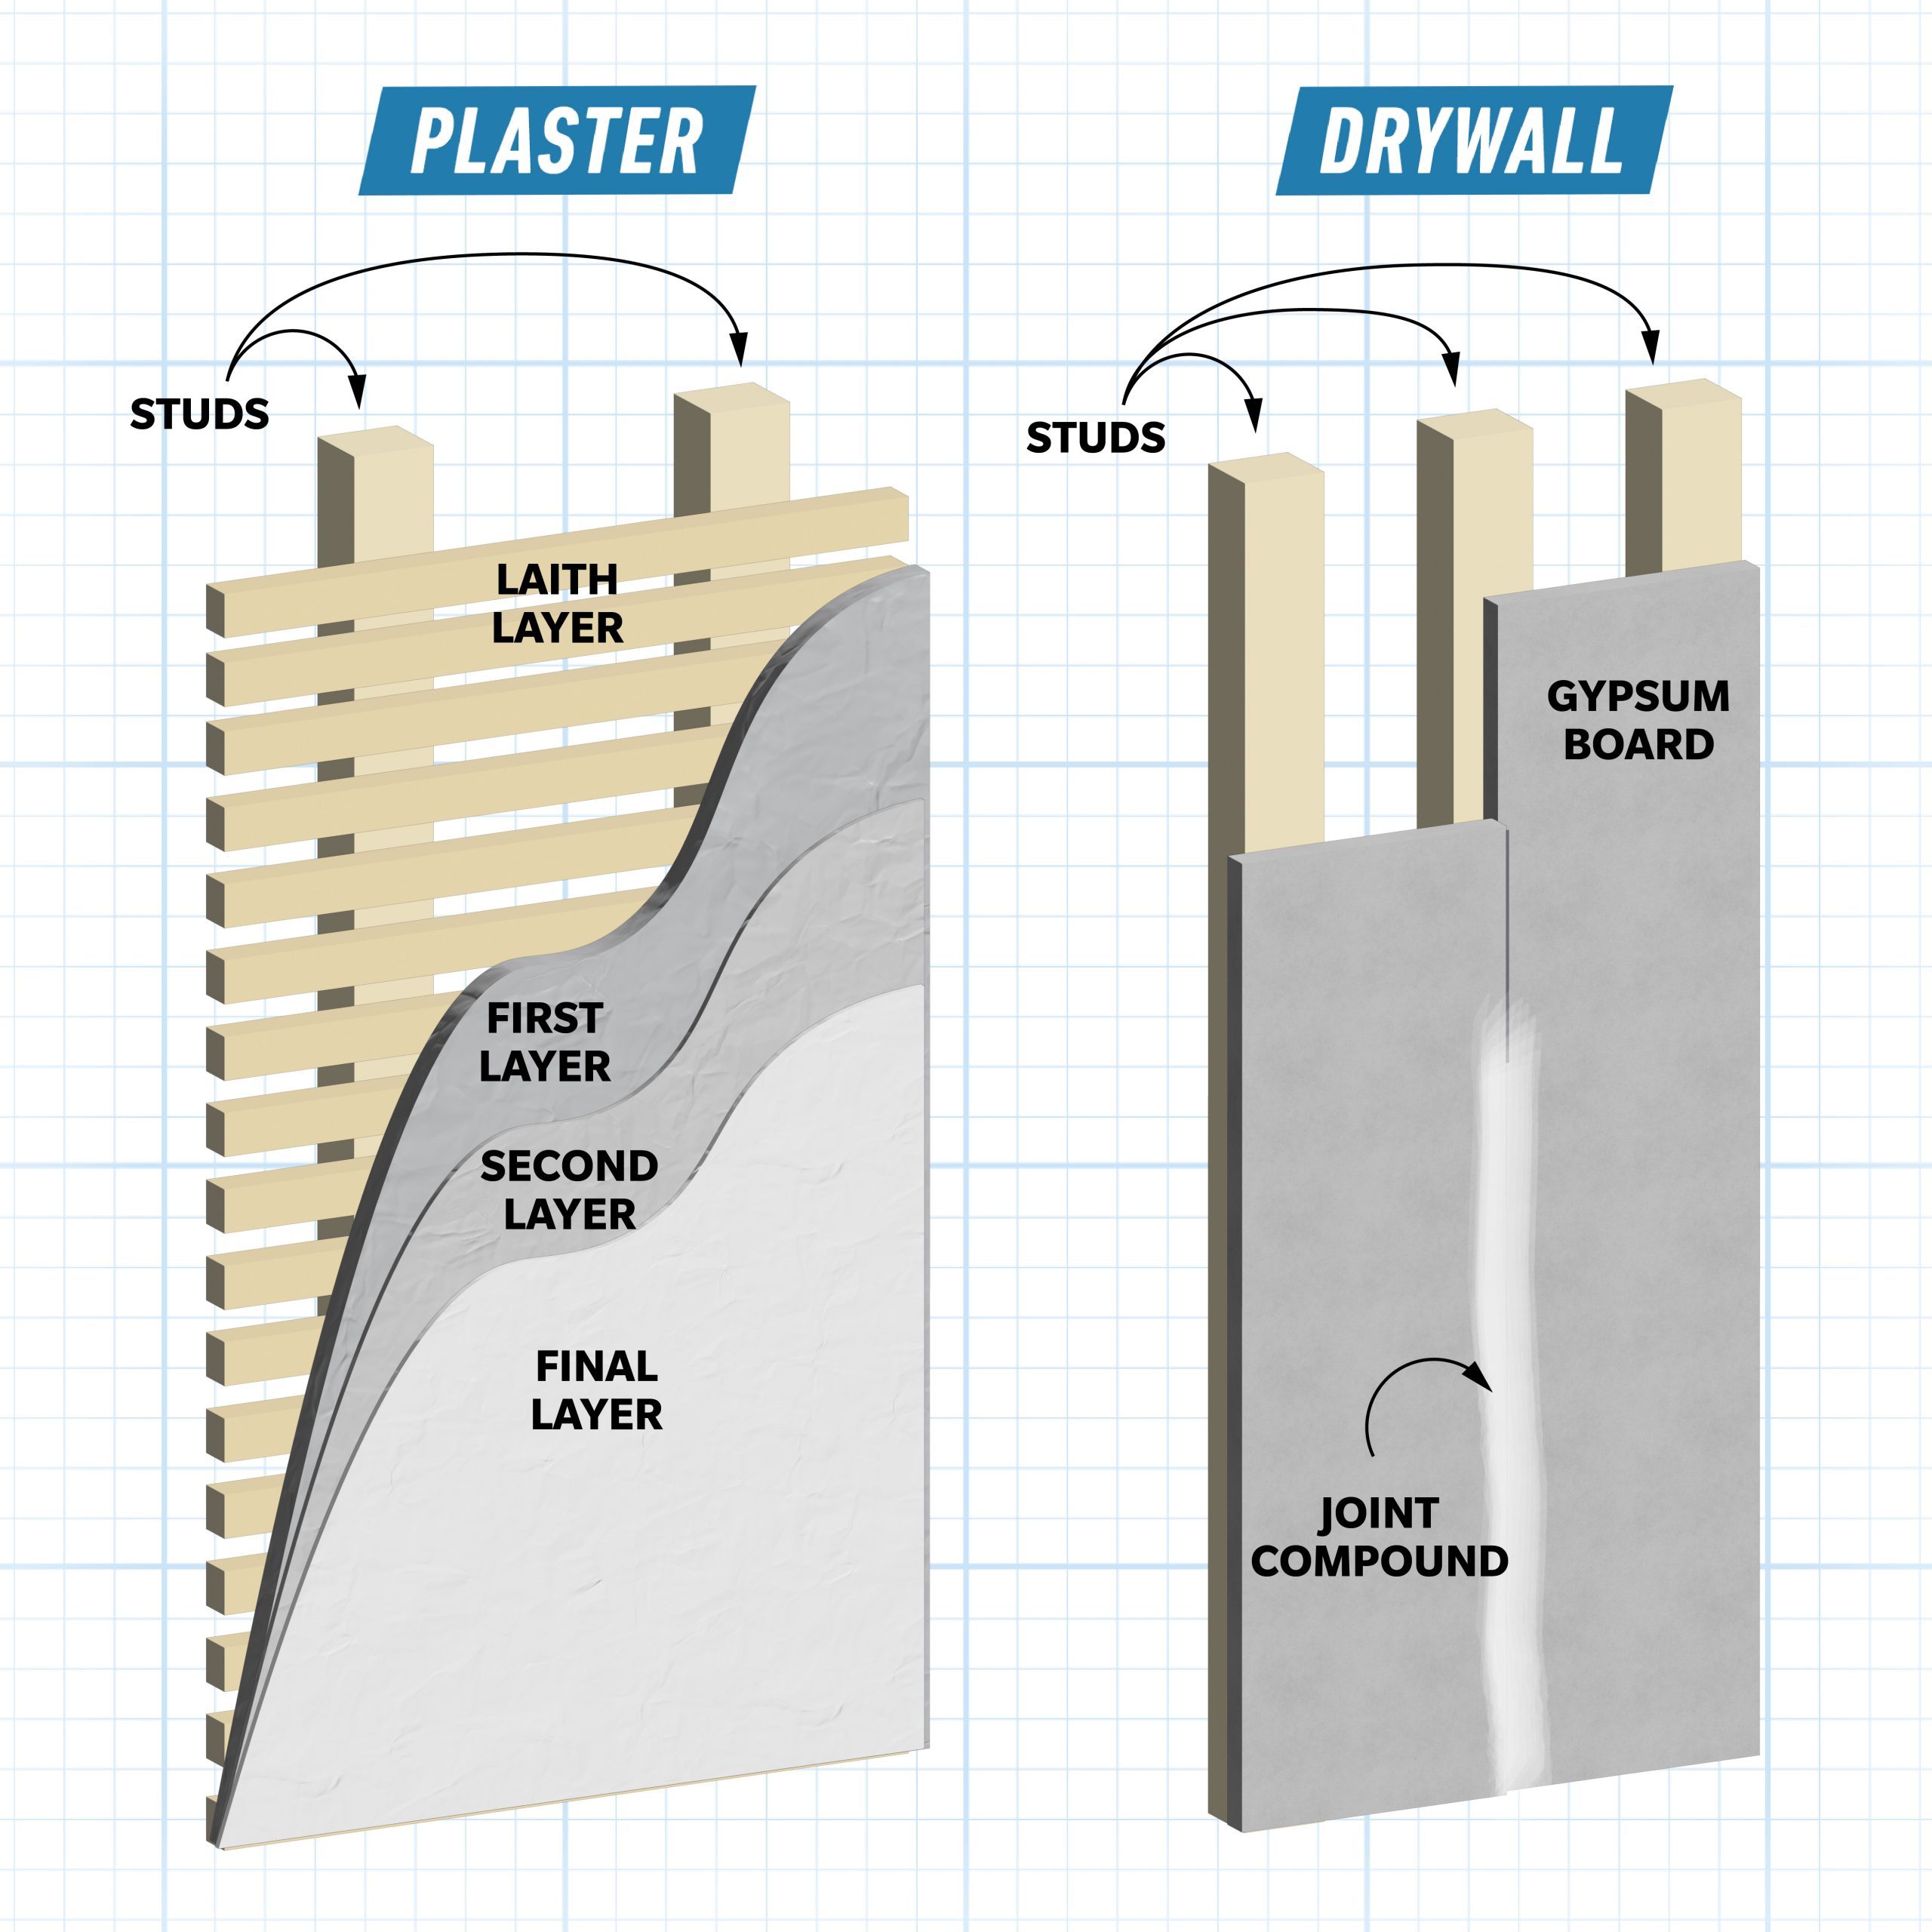 Plaster vs. Drywall: What's the Difference?